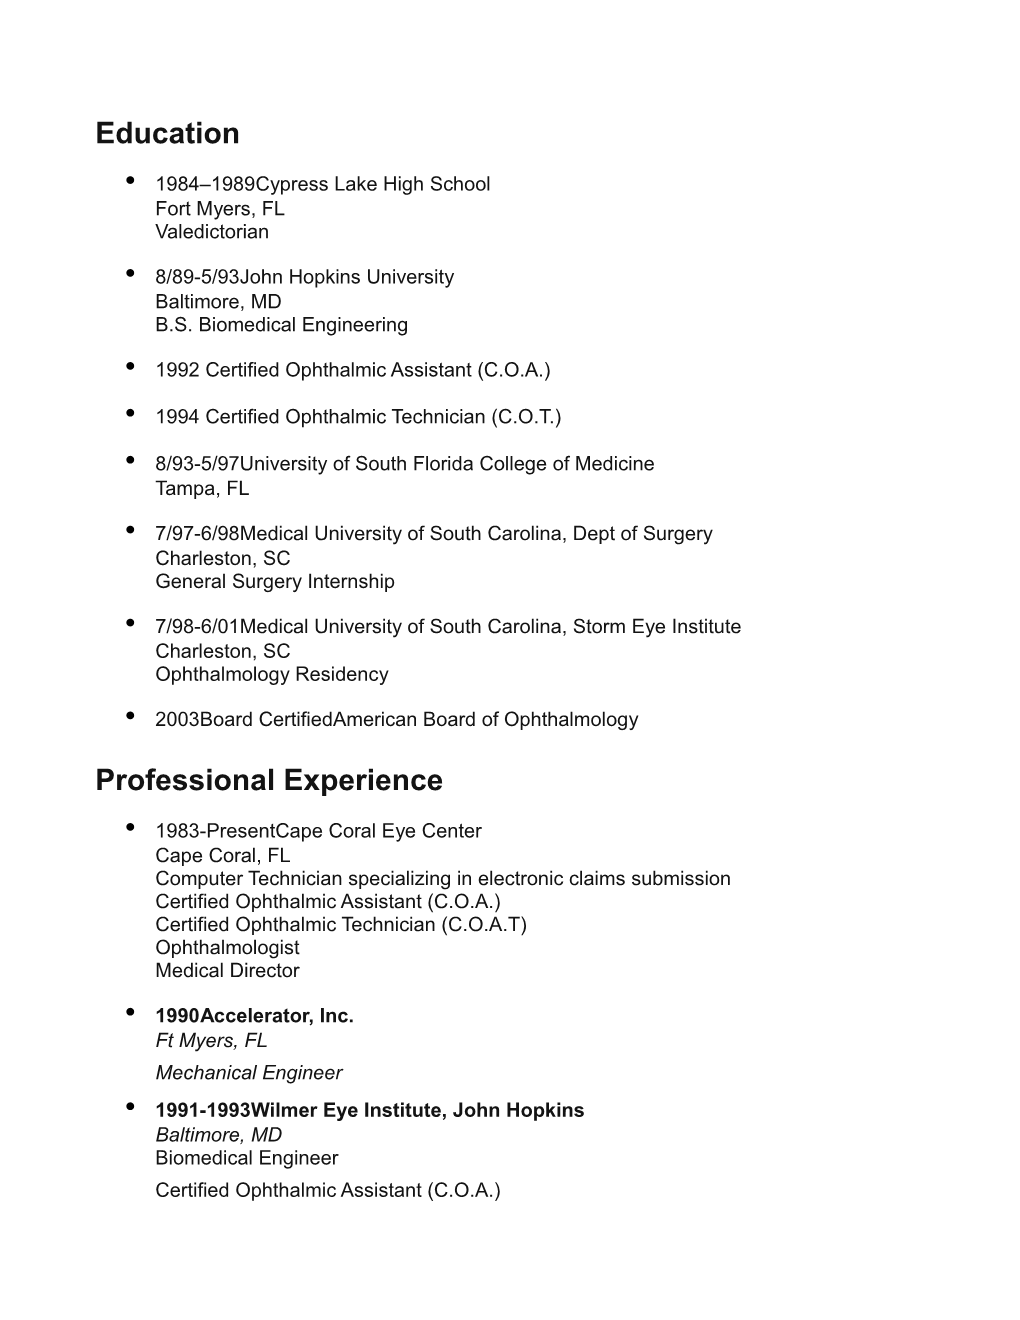 Education Professional Experience